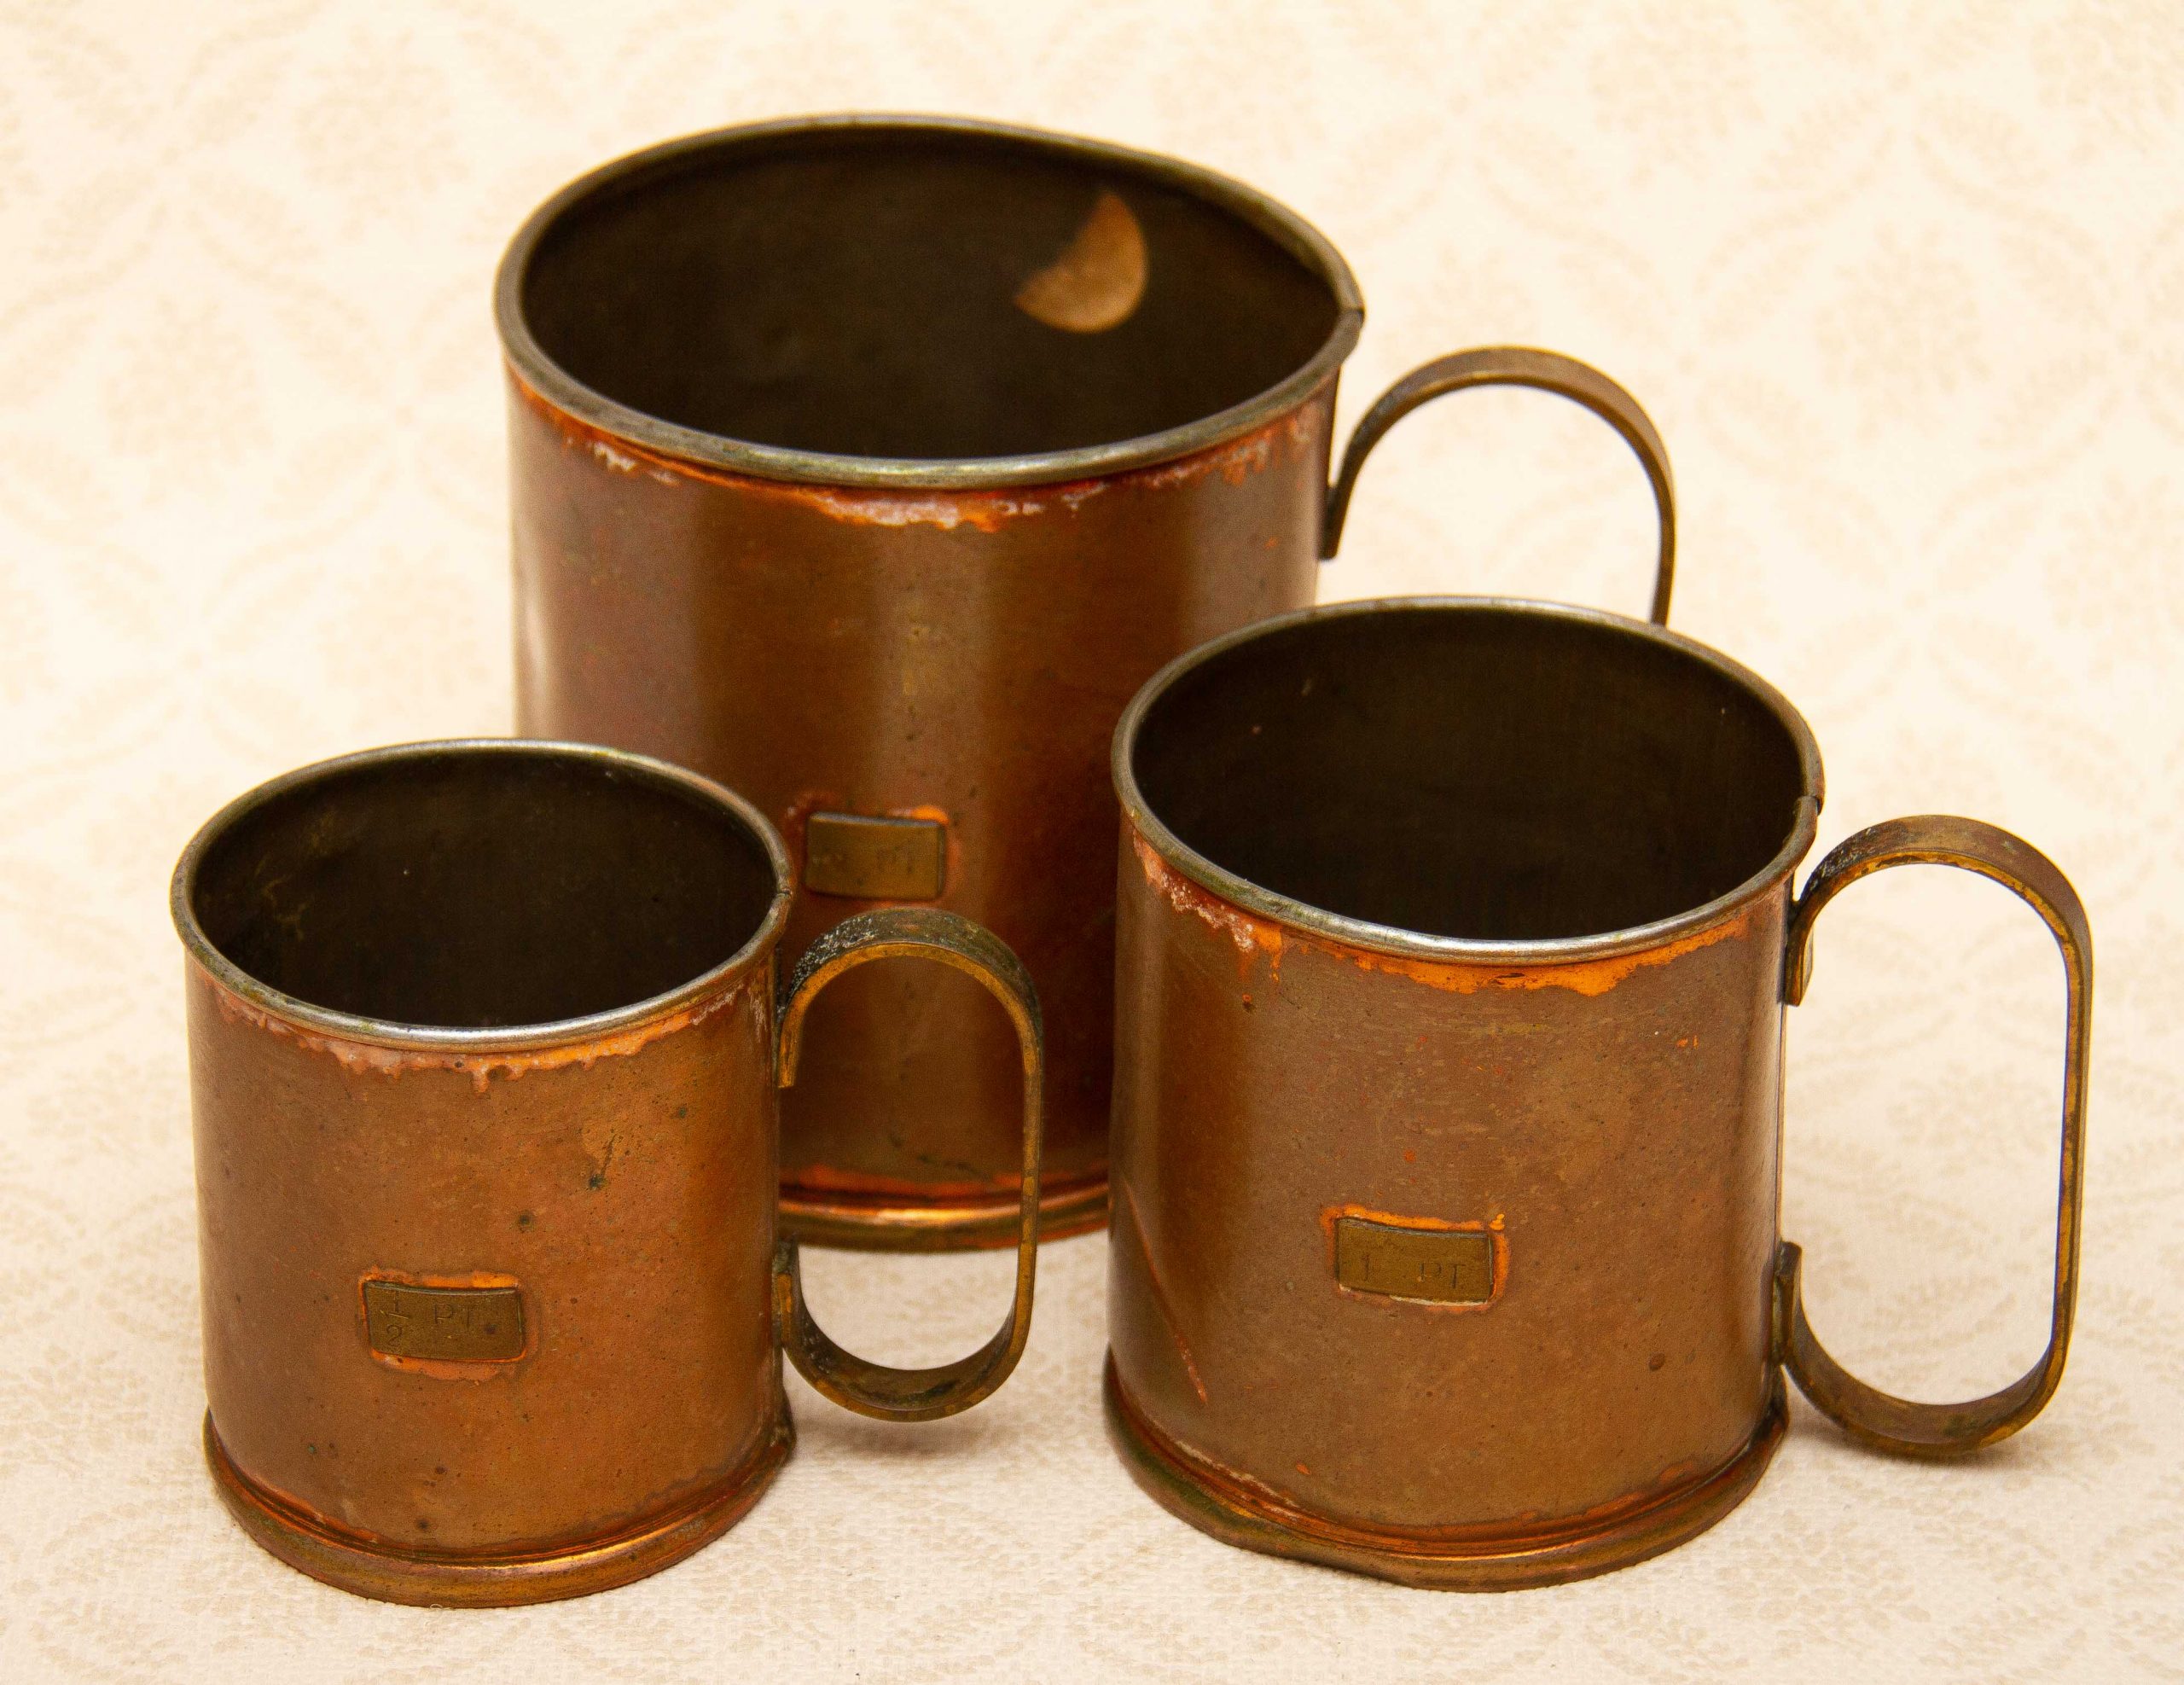 Set of 3 Antique Copper & Brass Measuring Cups With Handles - Love Vintage